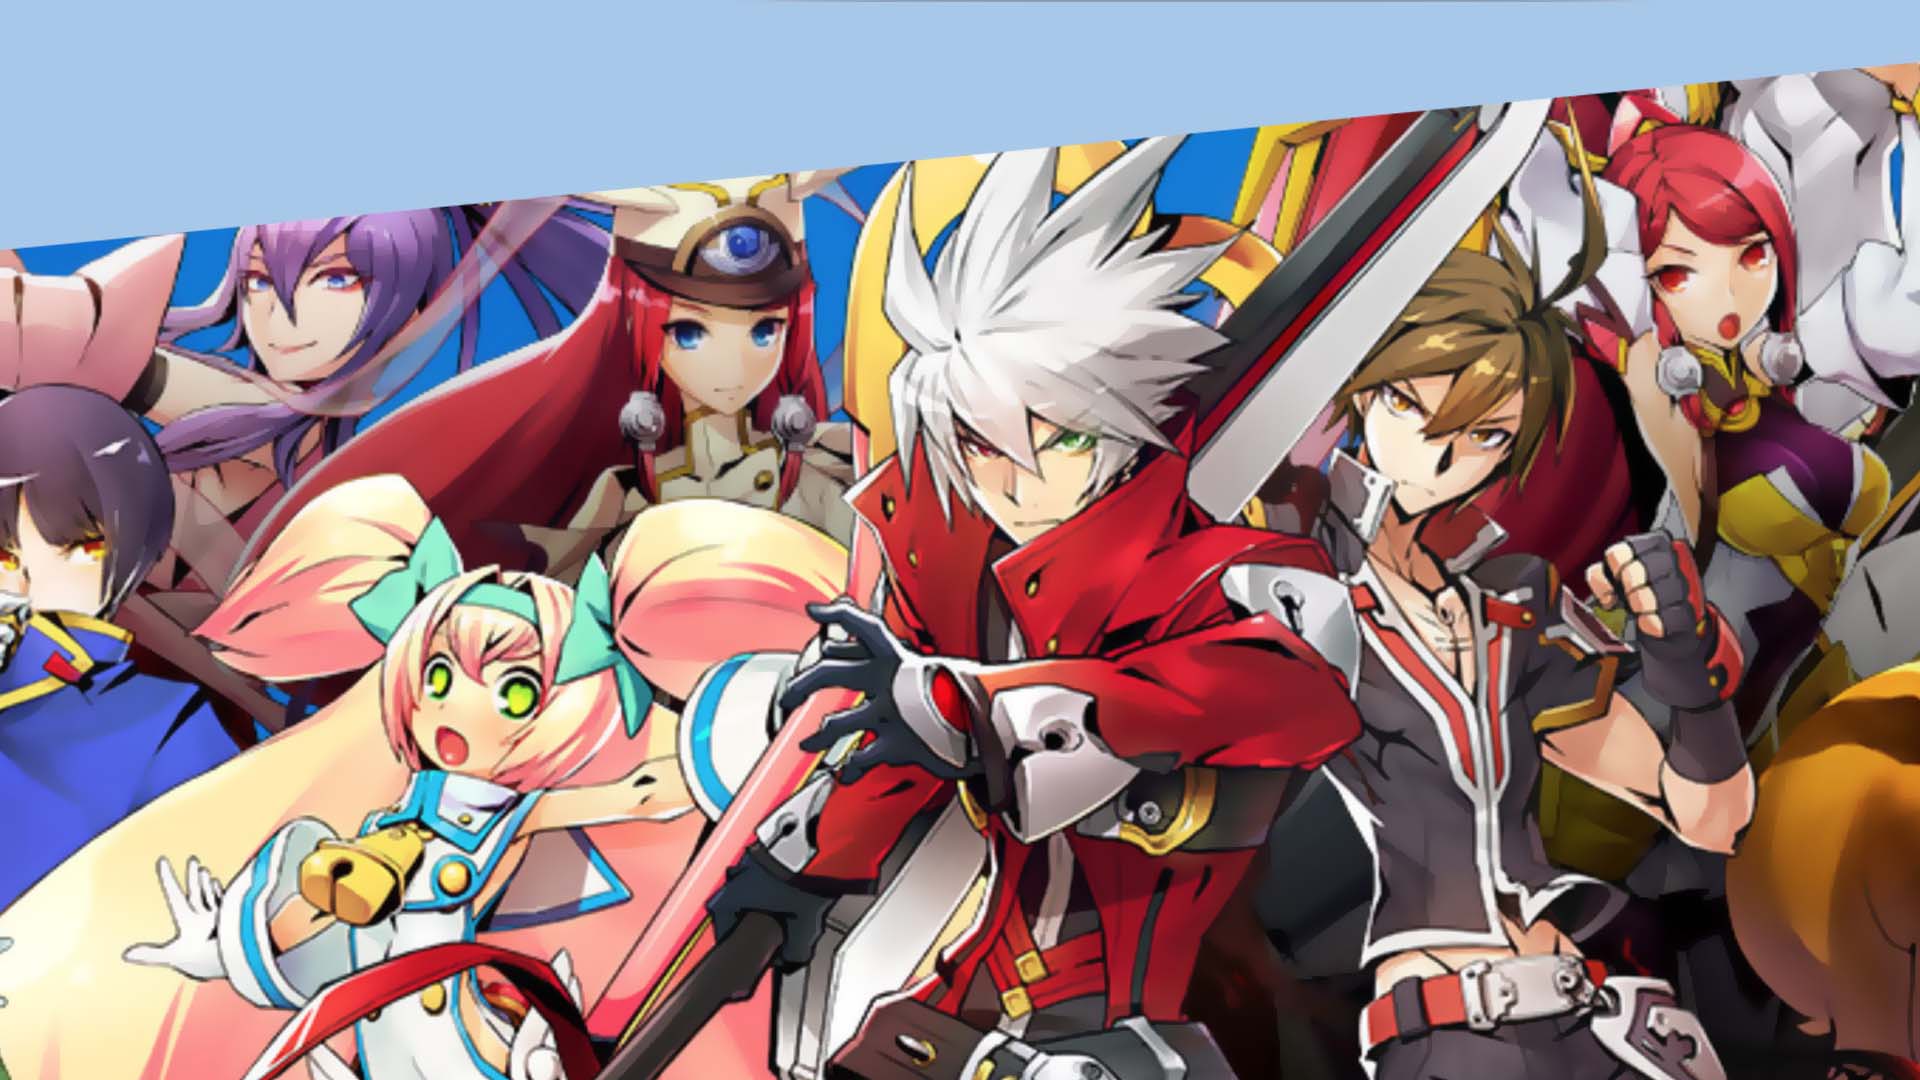 BlazBlue: Cross Tag Battle shows off the cast in its opening